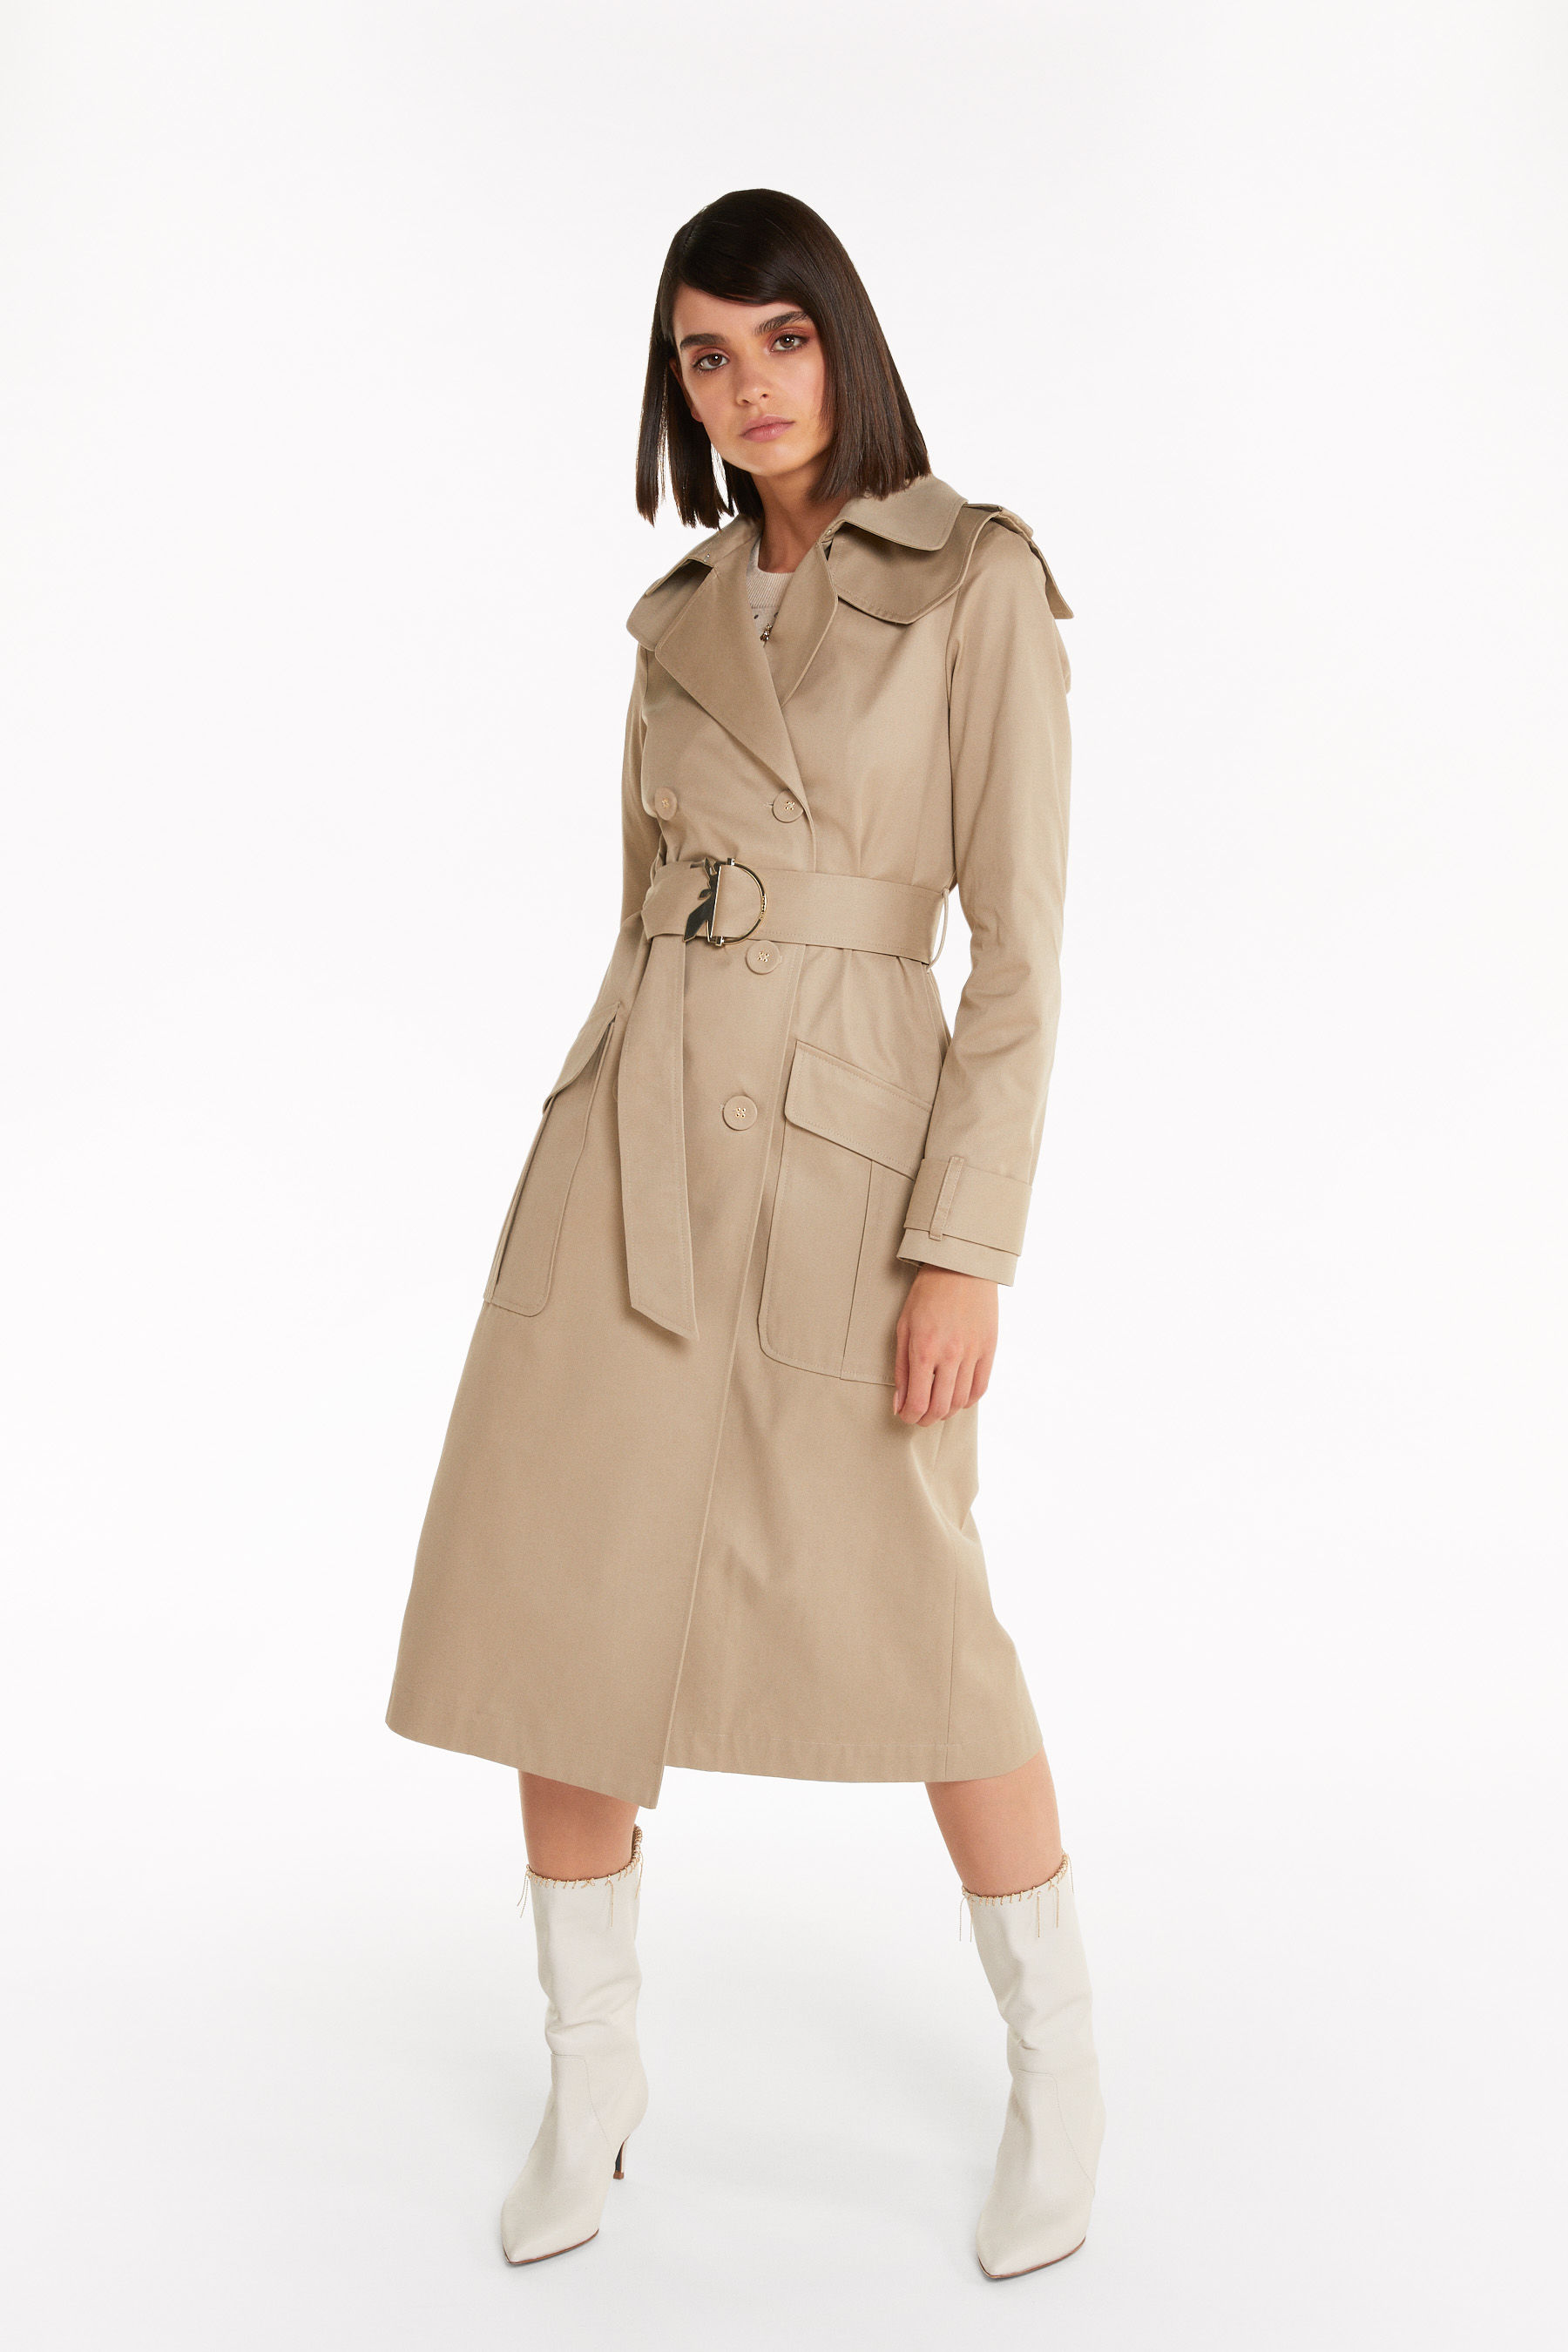 Pepe Jeans Trench coat WOMEN FASHION Coats Trench coat Basic discount 86% Beige M 